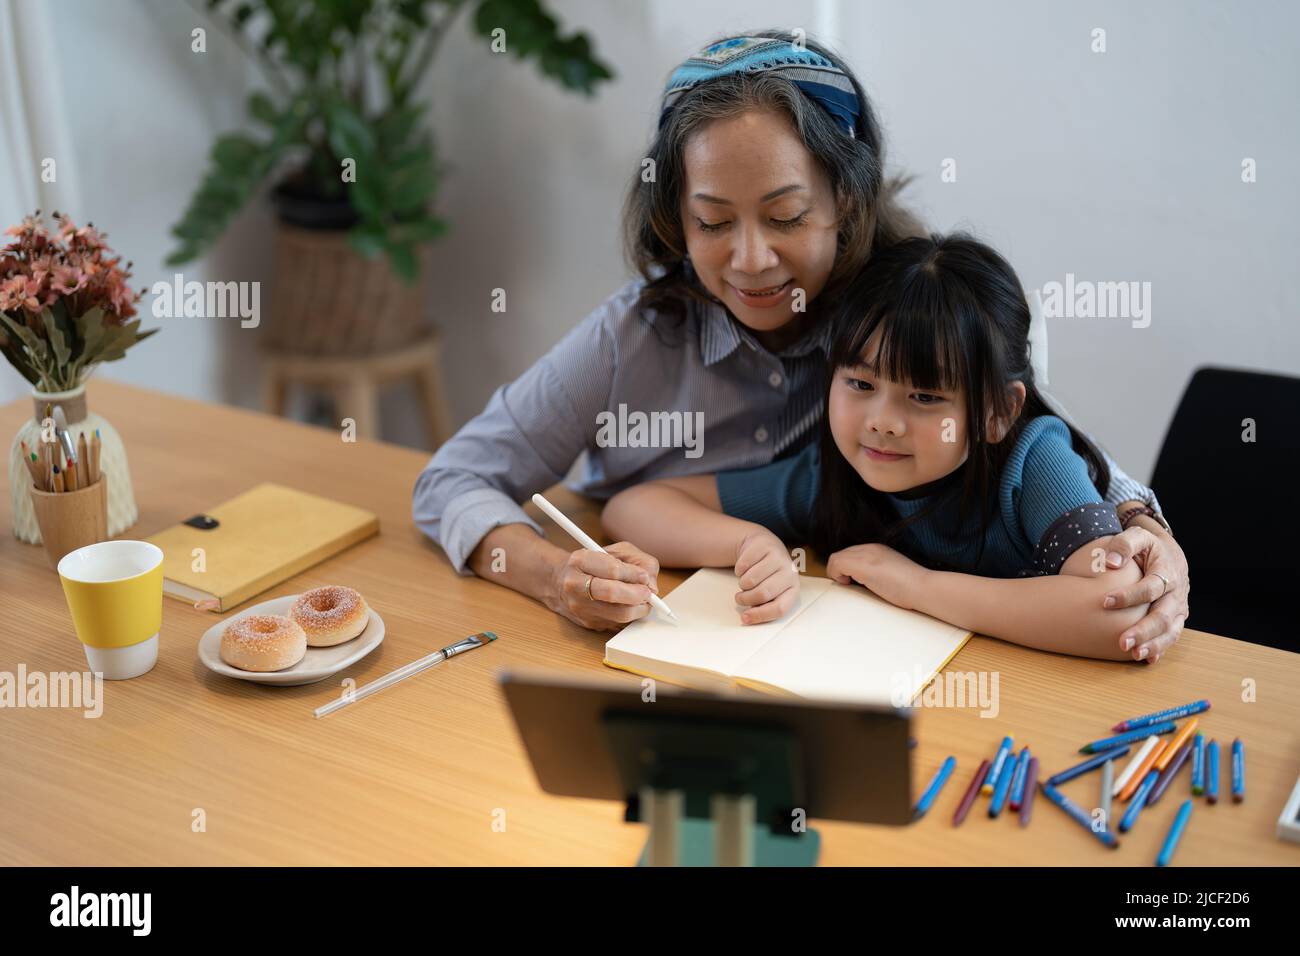 Smiling senior grandma and cute little kid granddaughter watching cartoons on laptop together, happy older grandmother grawing and painting. Stock Photo